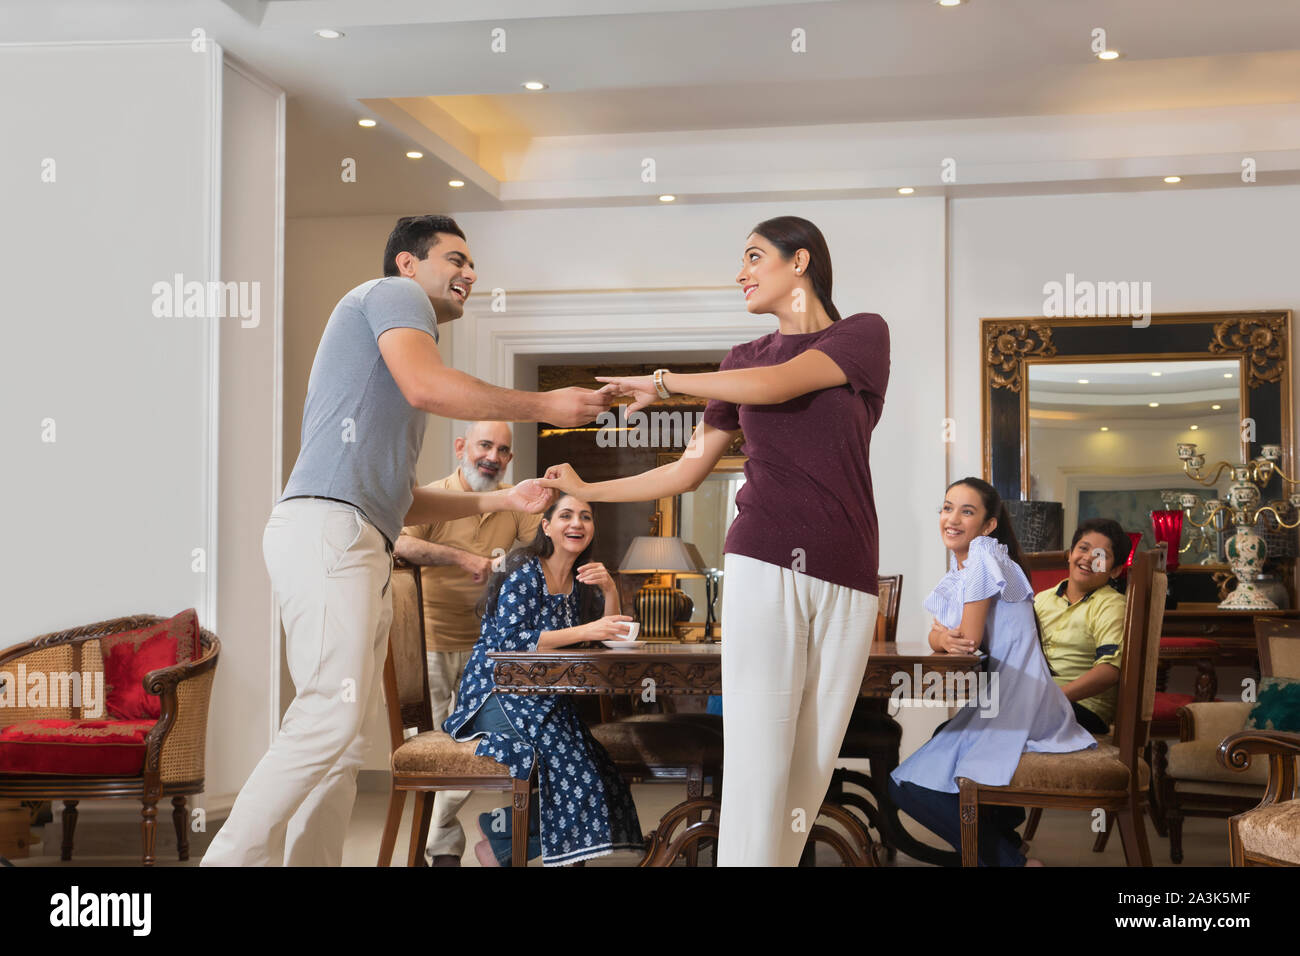 Young couple dance in the living room while the family watches. Stock Photo